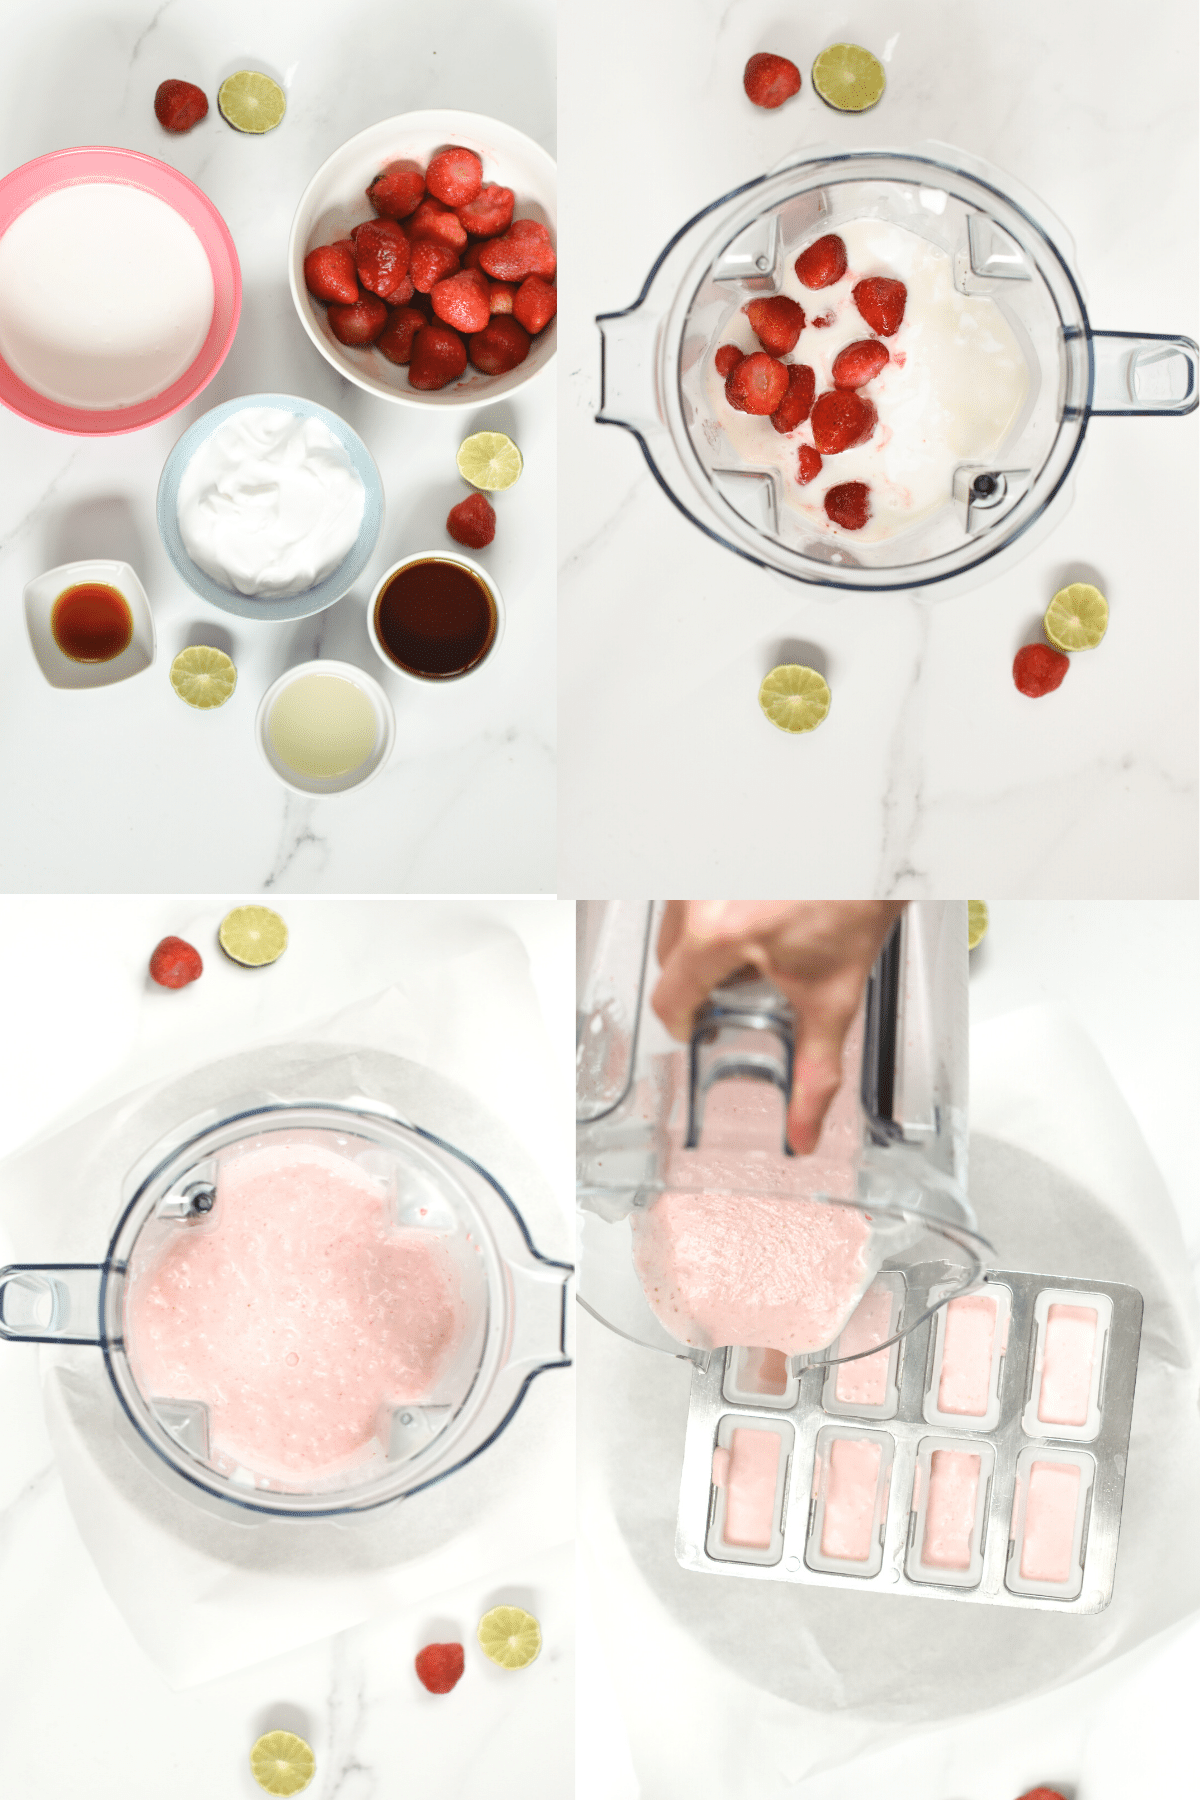 How to make Strawberry Ice Cream Popsicle